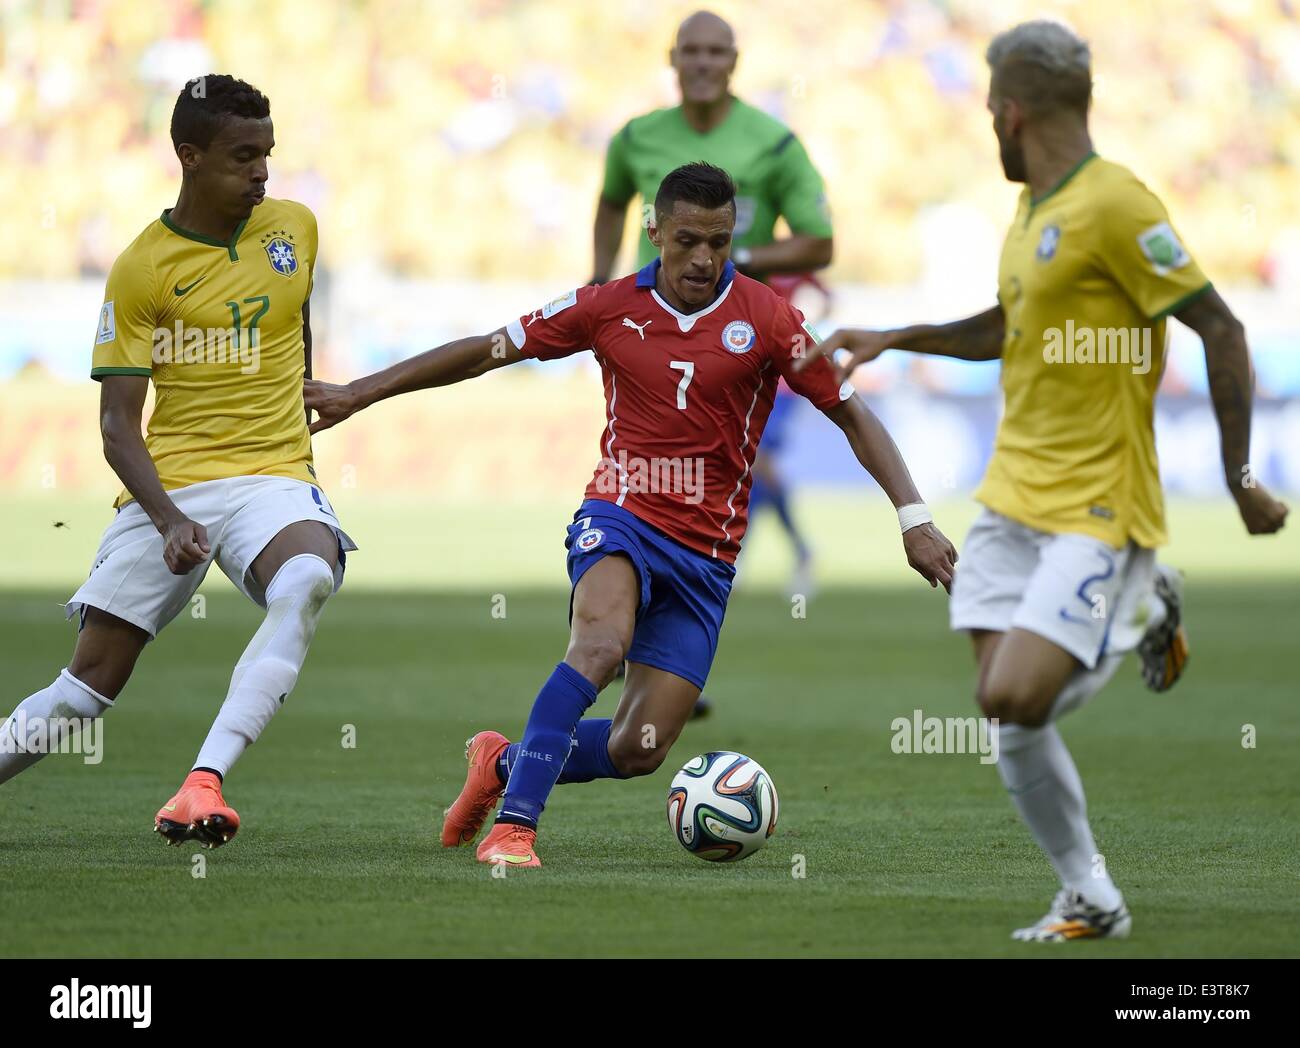 Belo Horizonte, Brazil. 28th June, 2014. Chile's Alexis Sanchez (C) controls the ball during a Round of 16 match between Brazil and Chile of 2014 FIFA World Cup at the Estadio Mineirao Stadium in Belo Horizonte, Brazil, on June 28, 2014. Credit:  Qi Heng/Xinhua/Alamy Live News Stock Photo